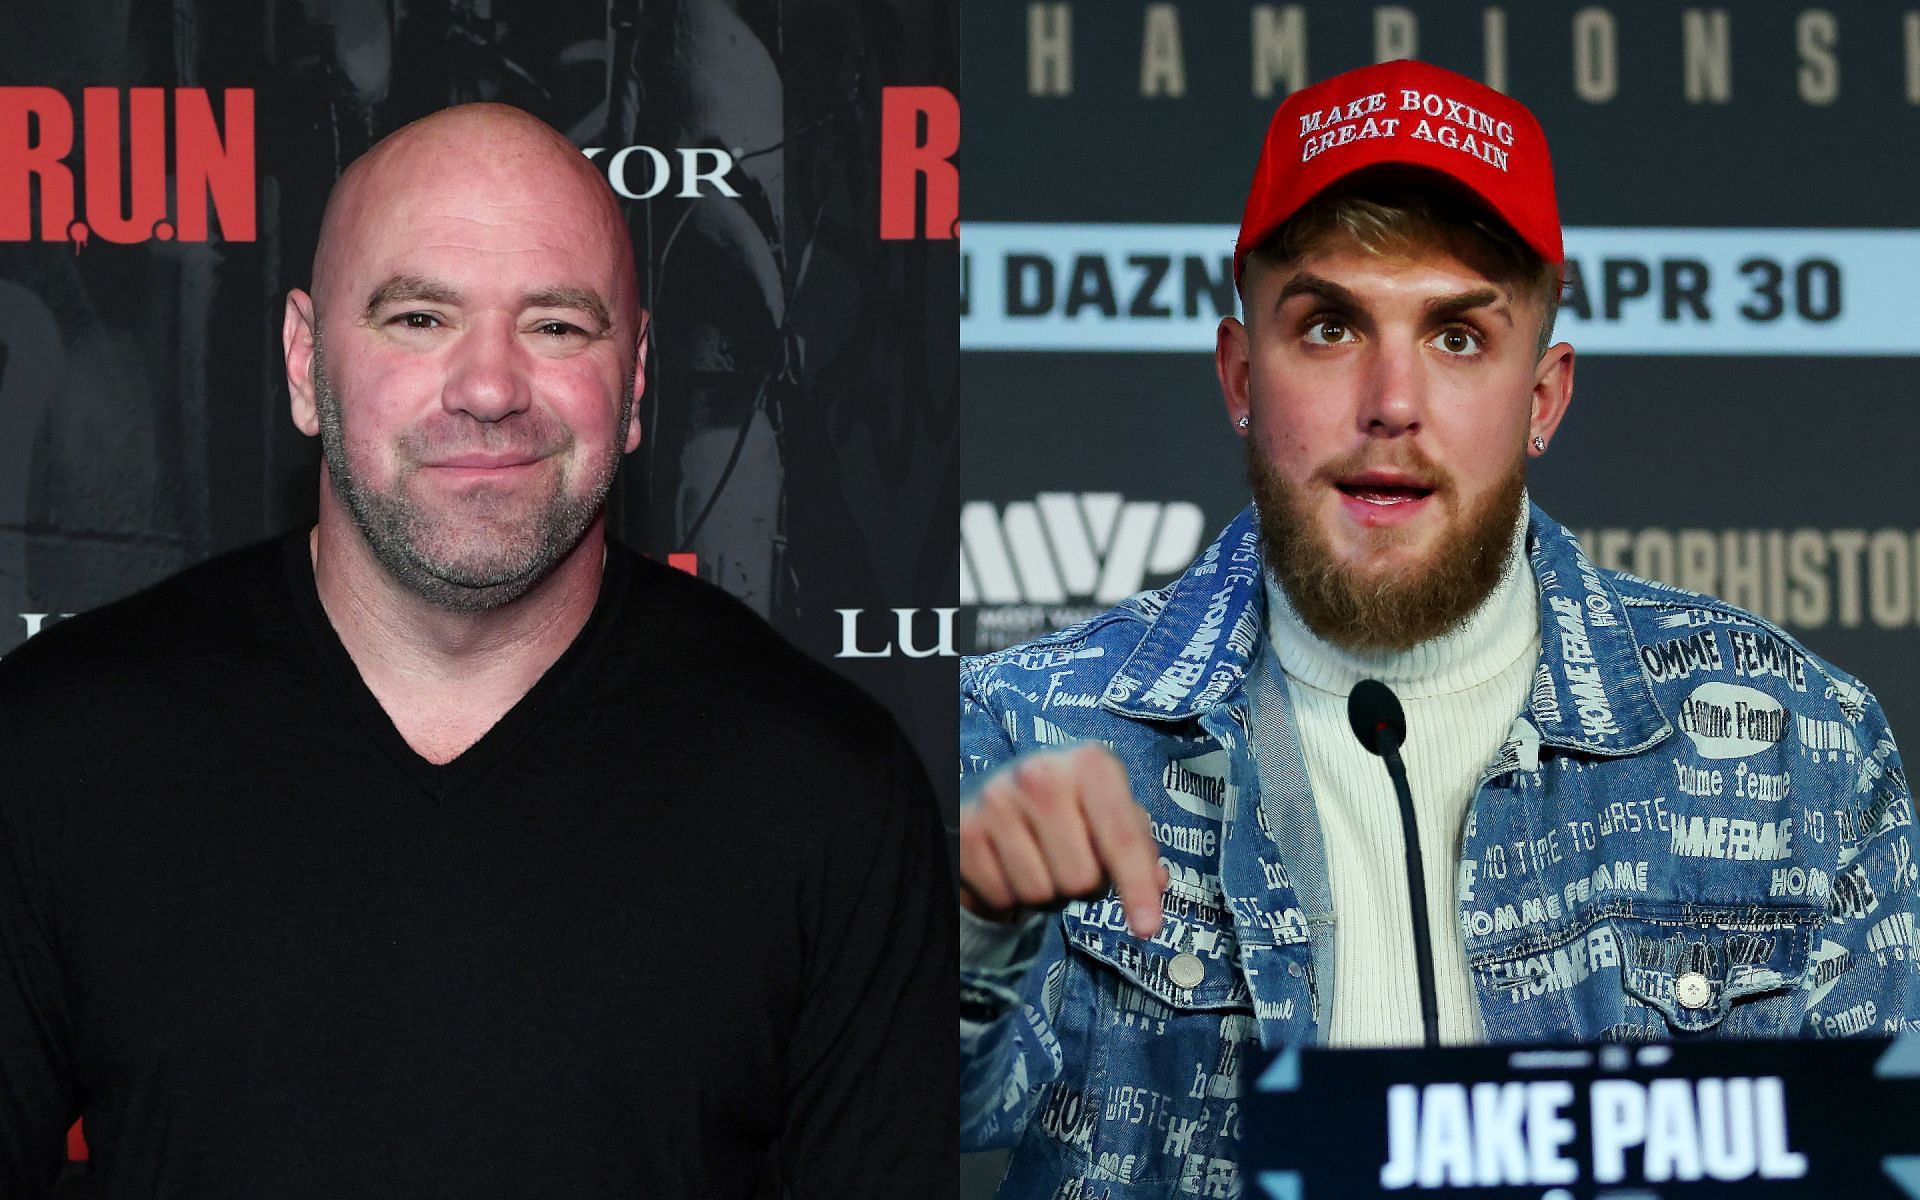 Dana White (left) and Jake Paul (right) (Images via Getty)